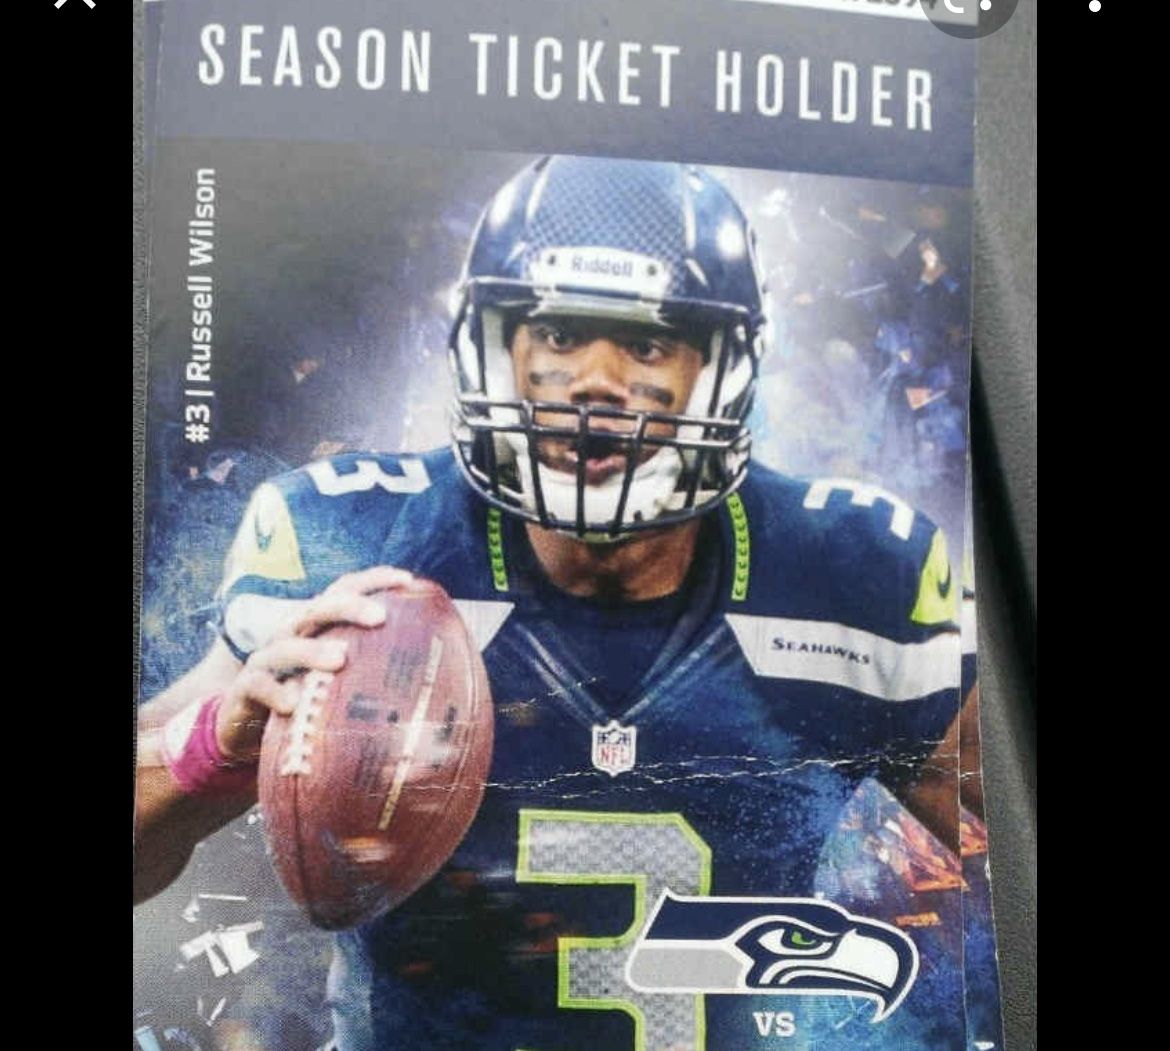 2 Seahawks 49ers Club seats: 40 Yd Line Section 233 